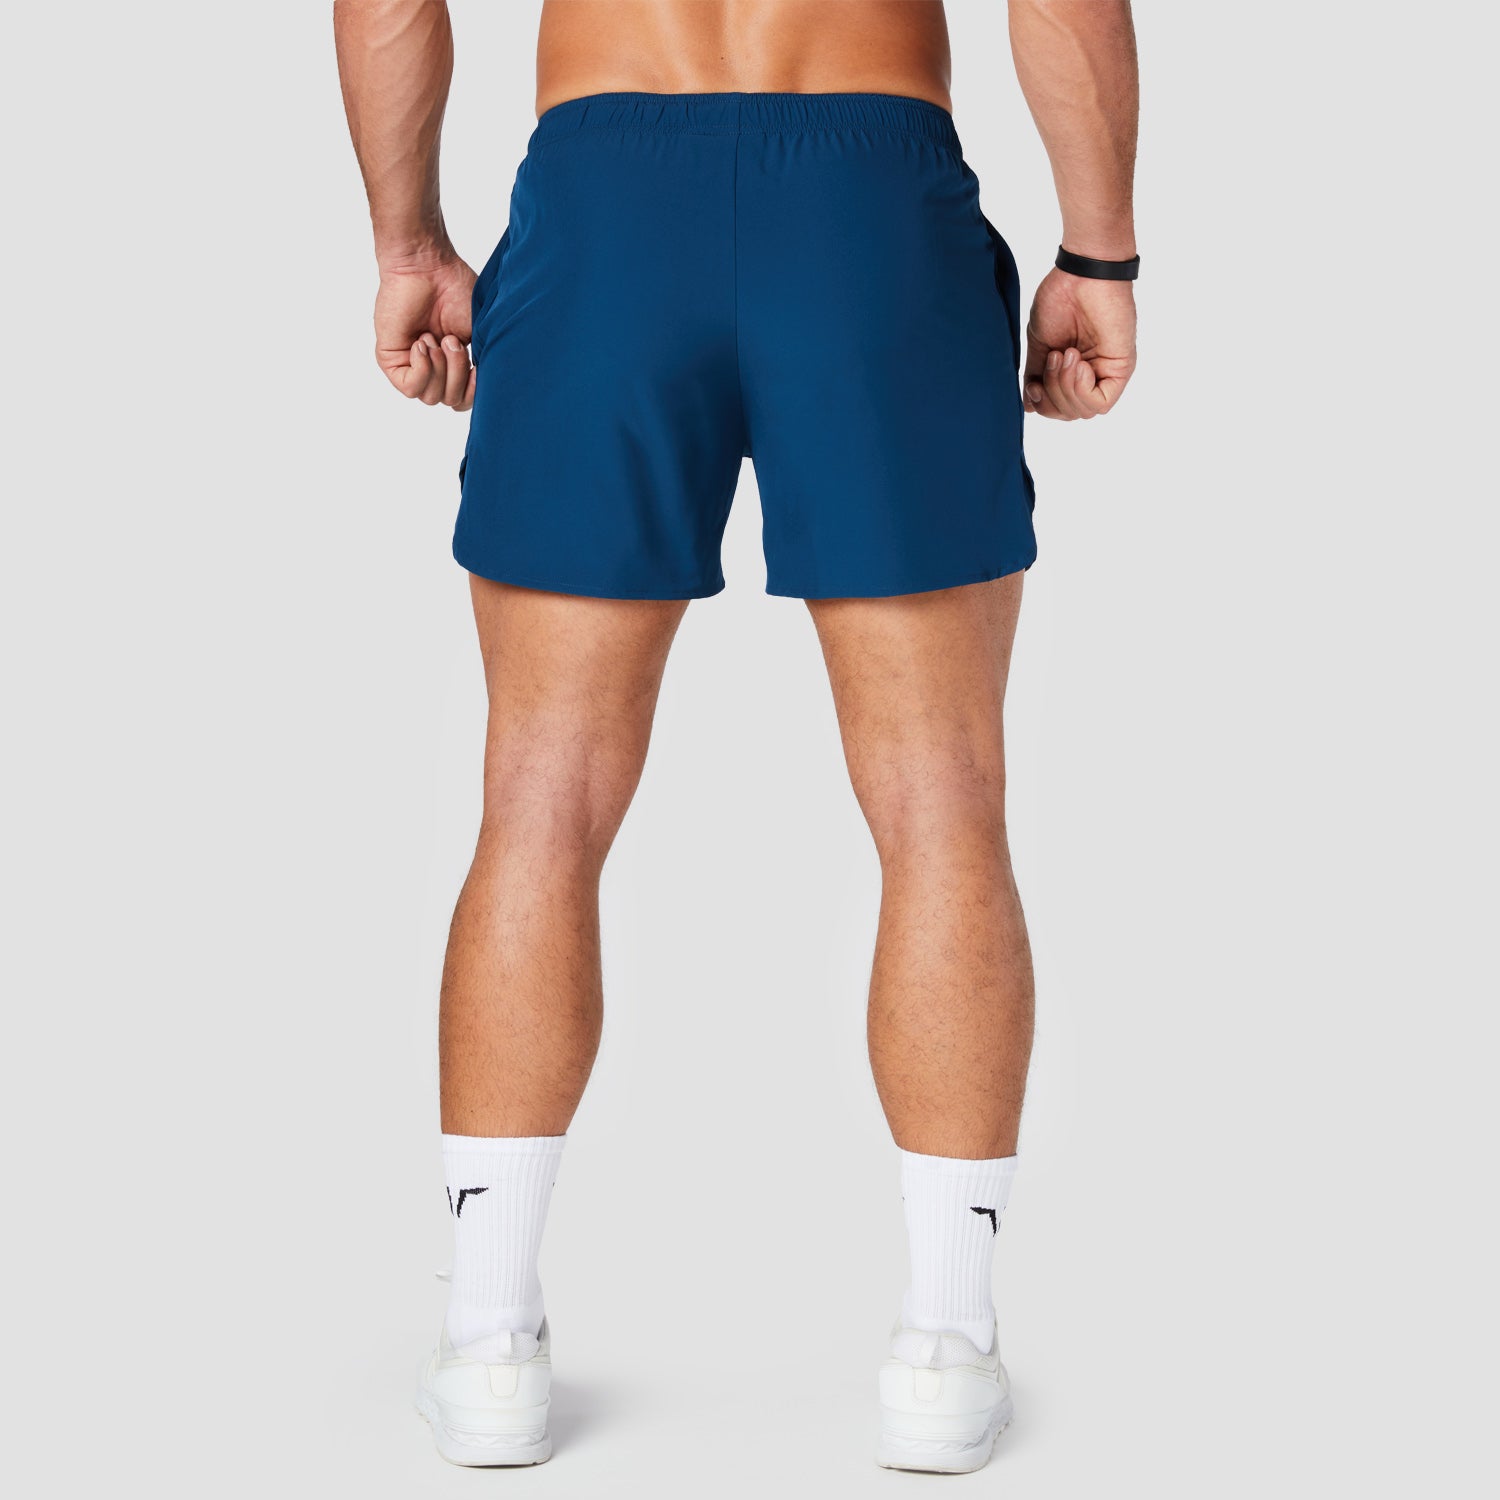 squatwolf-workout-short-for-men-core-mesh-2-in-1-shorts-royal-blue-gym-wear